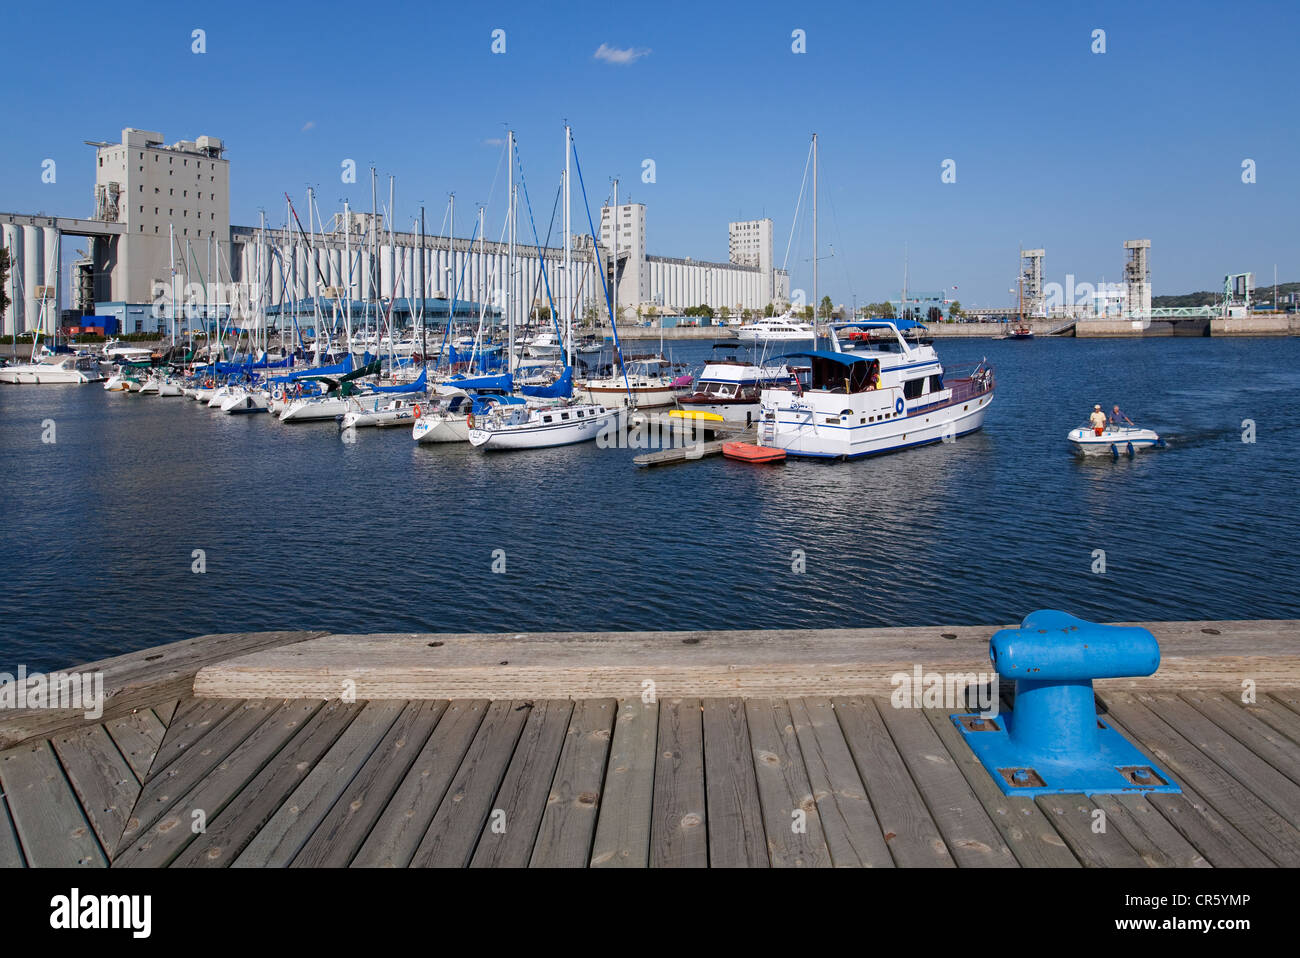 Canada, Quebec Province, Quebec City, marina with sailboats and yachts in front of the Bunge Silos, motor boat and a bitt in Stock Photo